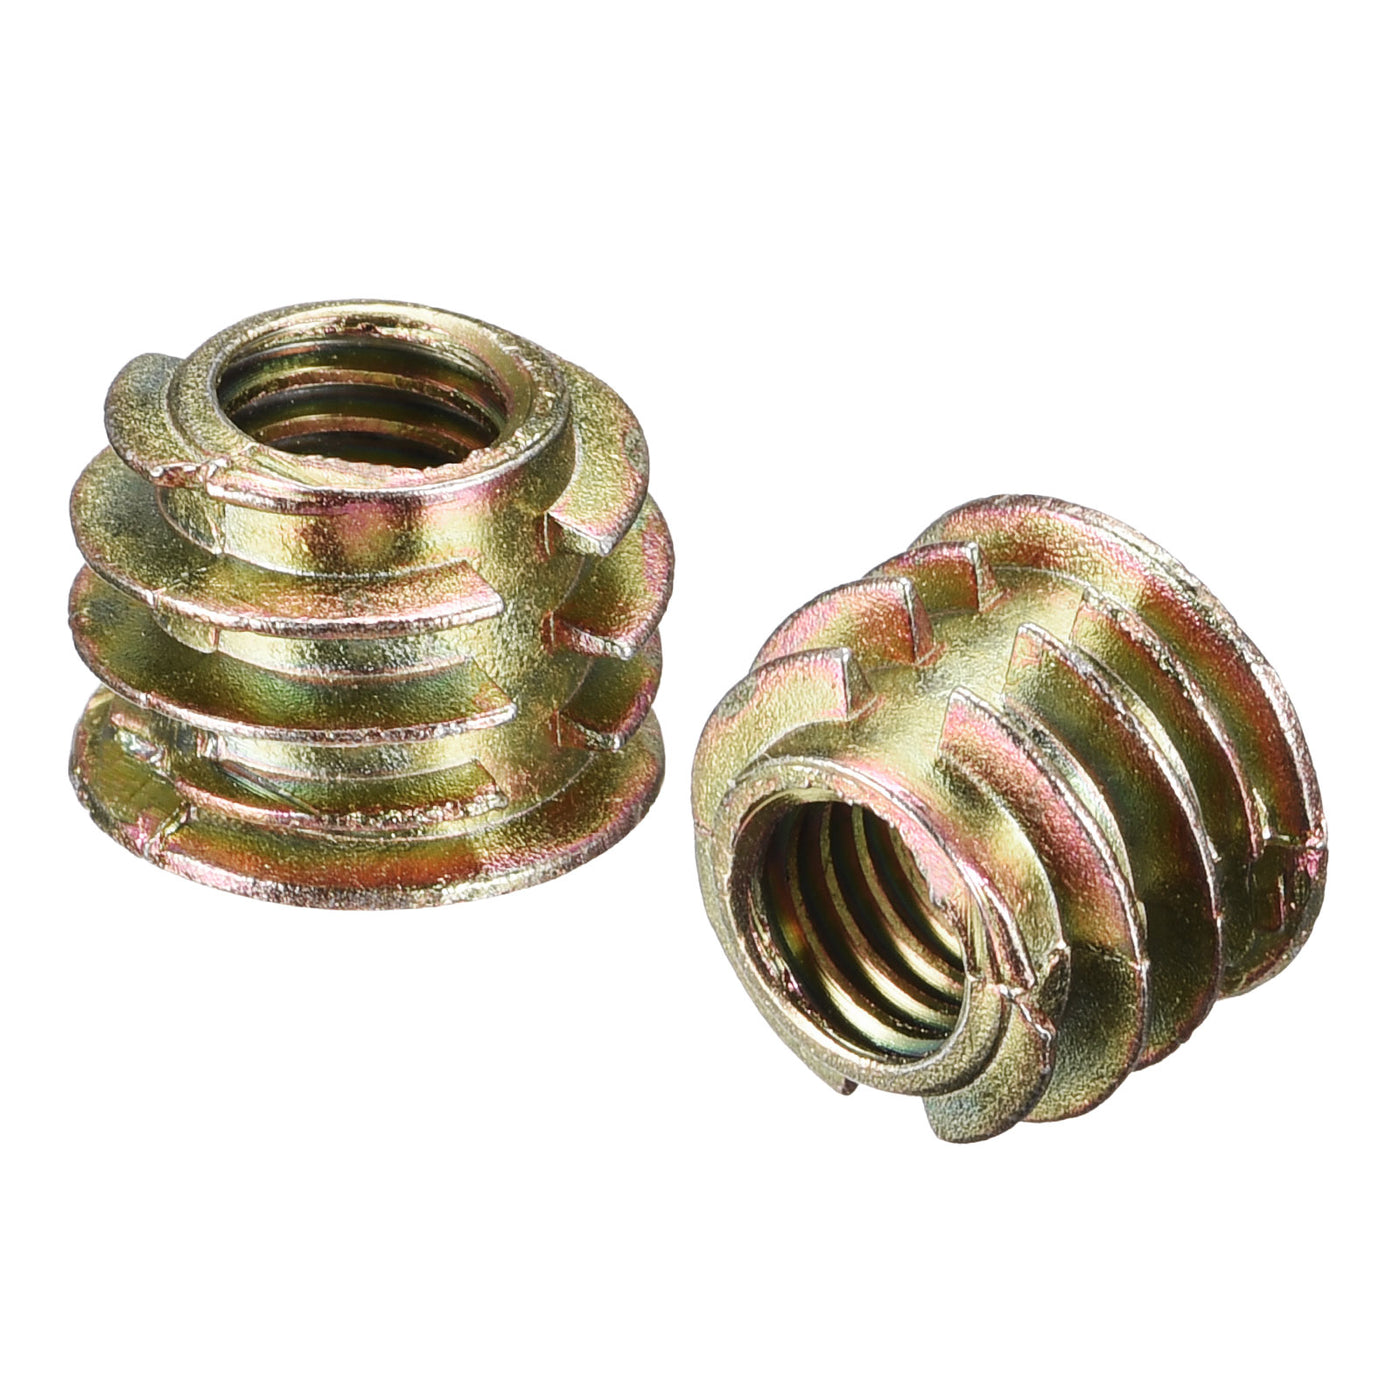 uxcell Uxcell M6x8mm Furniture Screw-in Nut Zinc Alloy Threaded Insert Nuts for Wood 120pcs